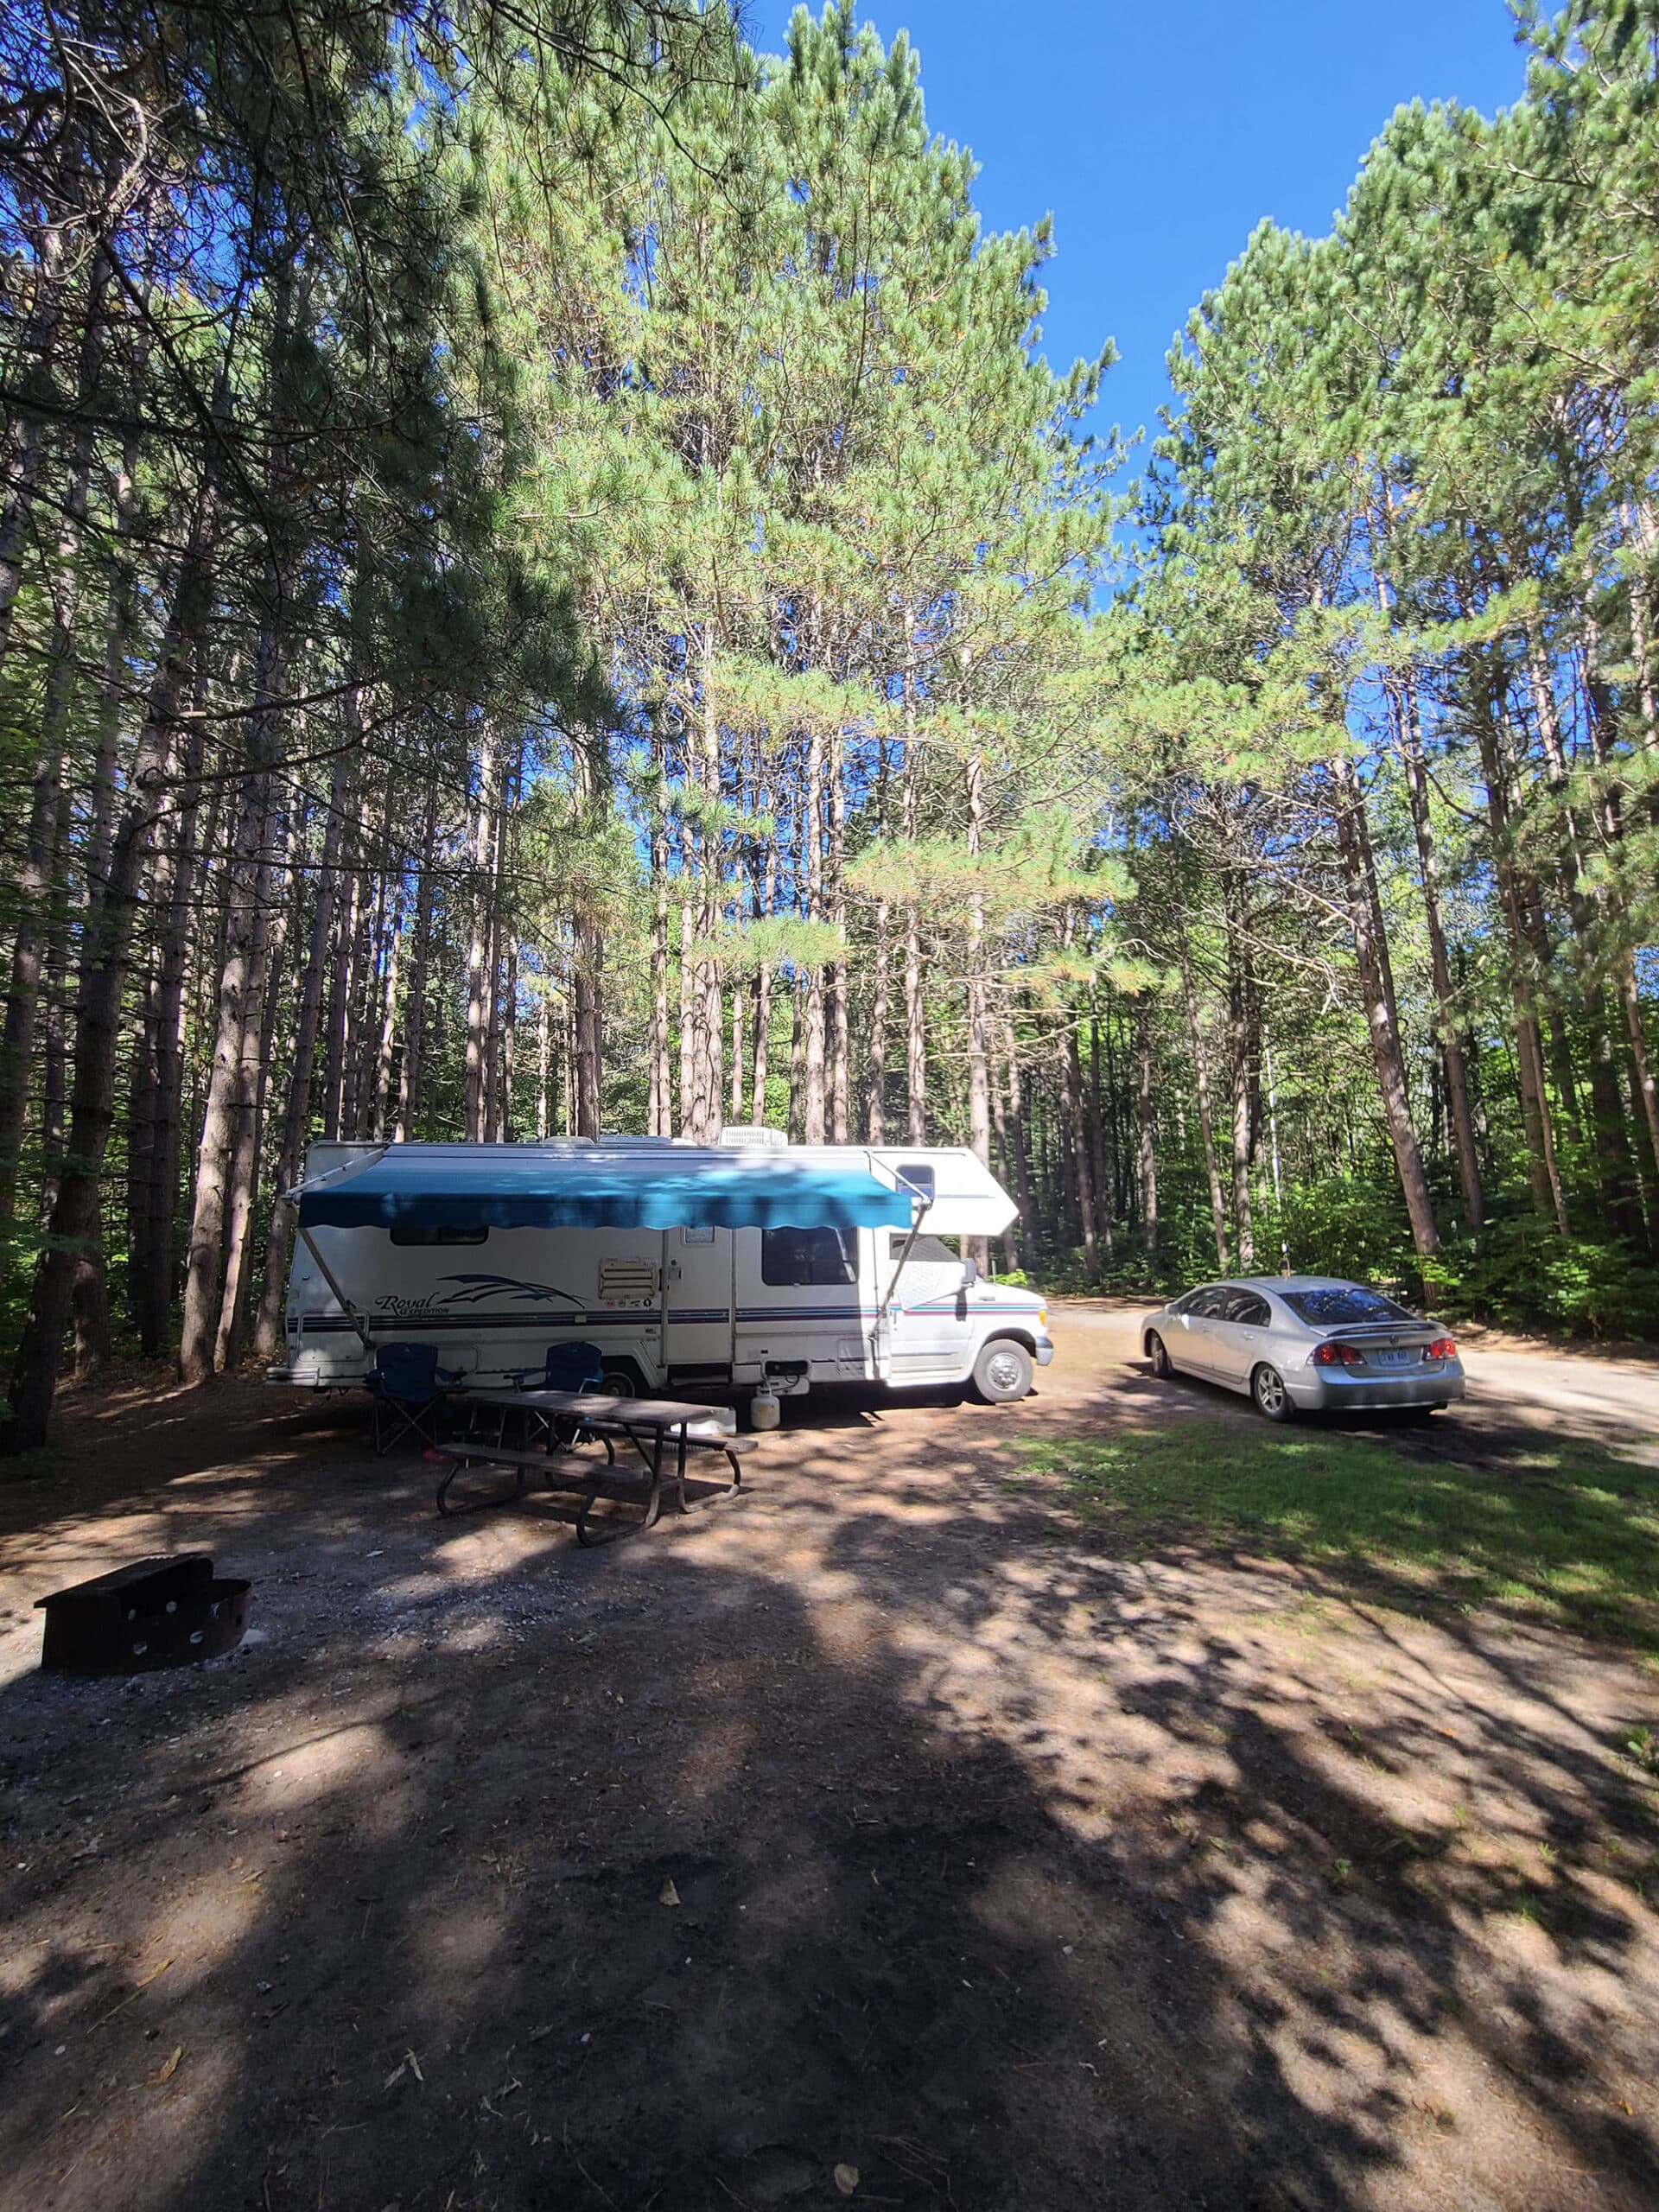 An RV and car parked at a camp site.  Tall trees block much of the light on the site, though it is a sunny day.